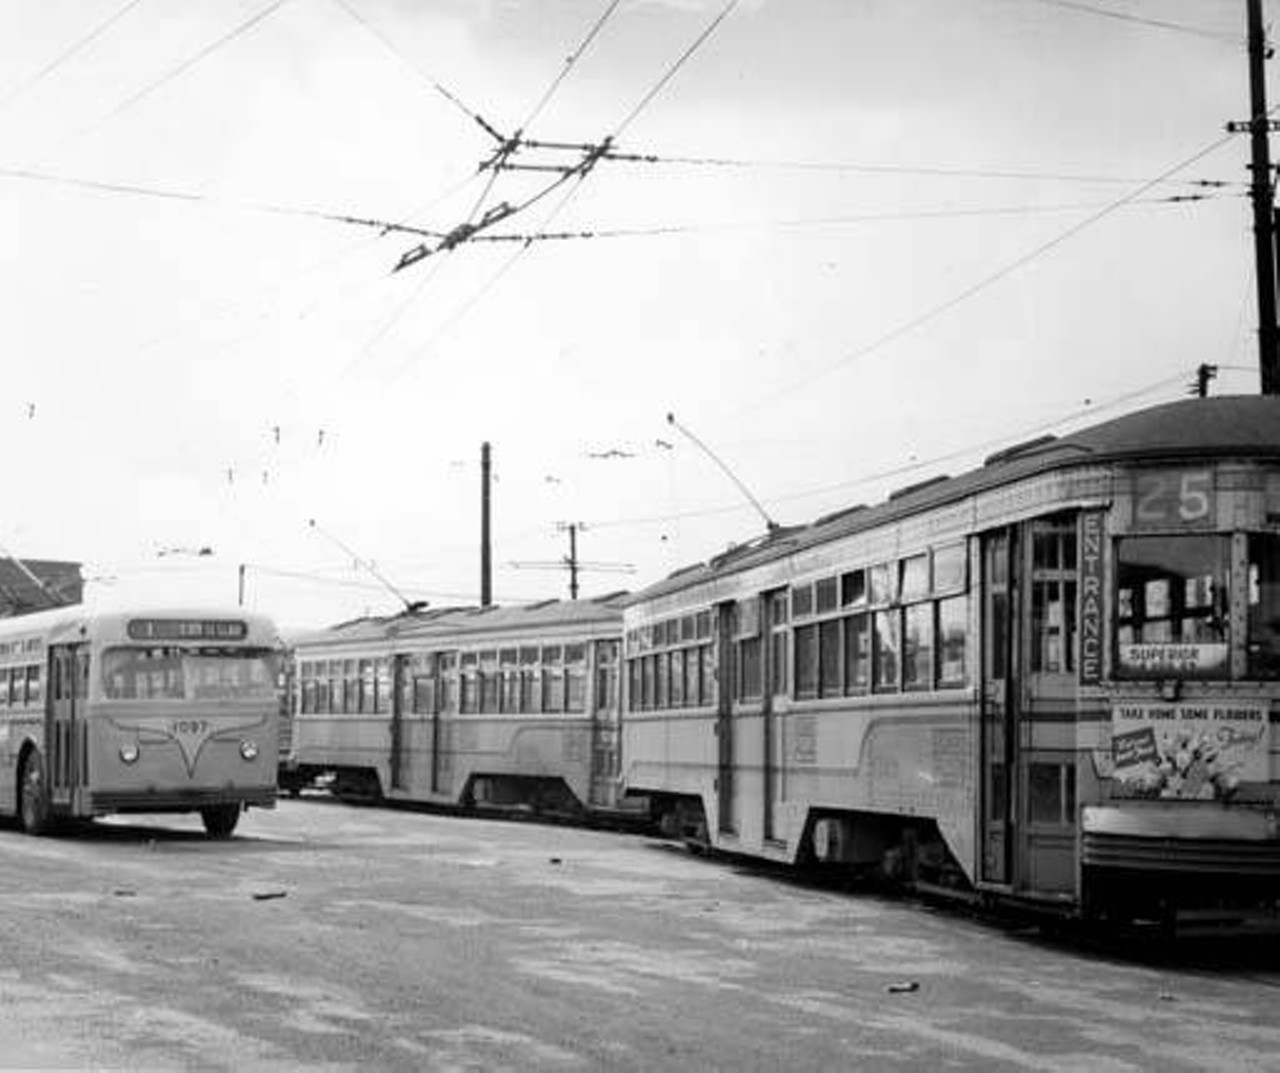 Cleveland Transit Car 4103 and Trackless Trolley 1097 at St. Clair Station in Cleveland, Ohio.